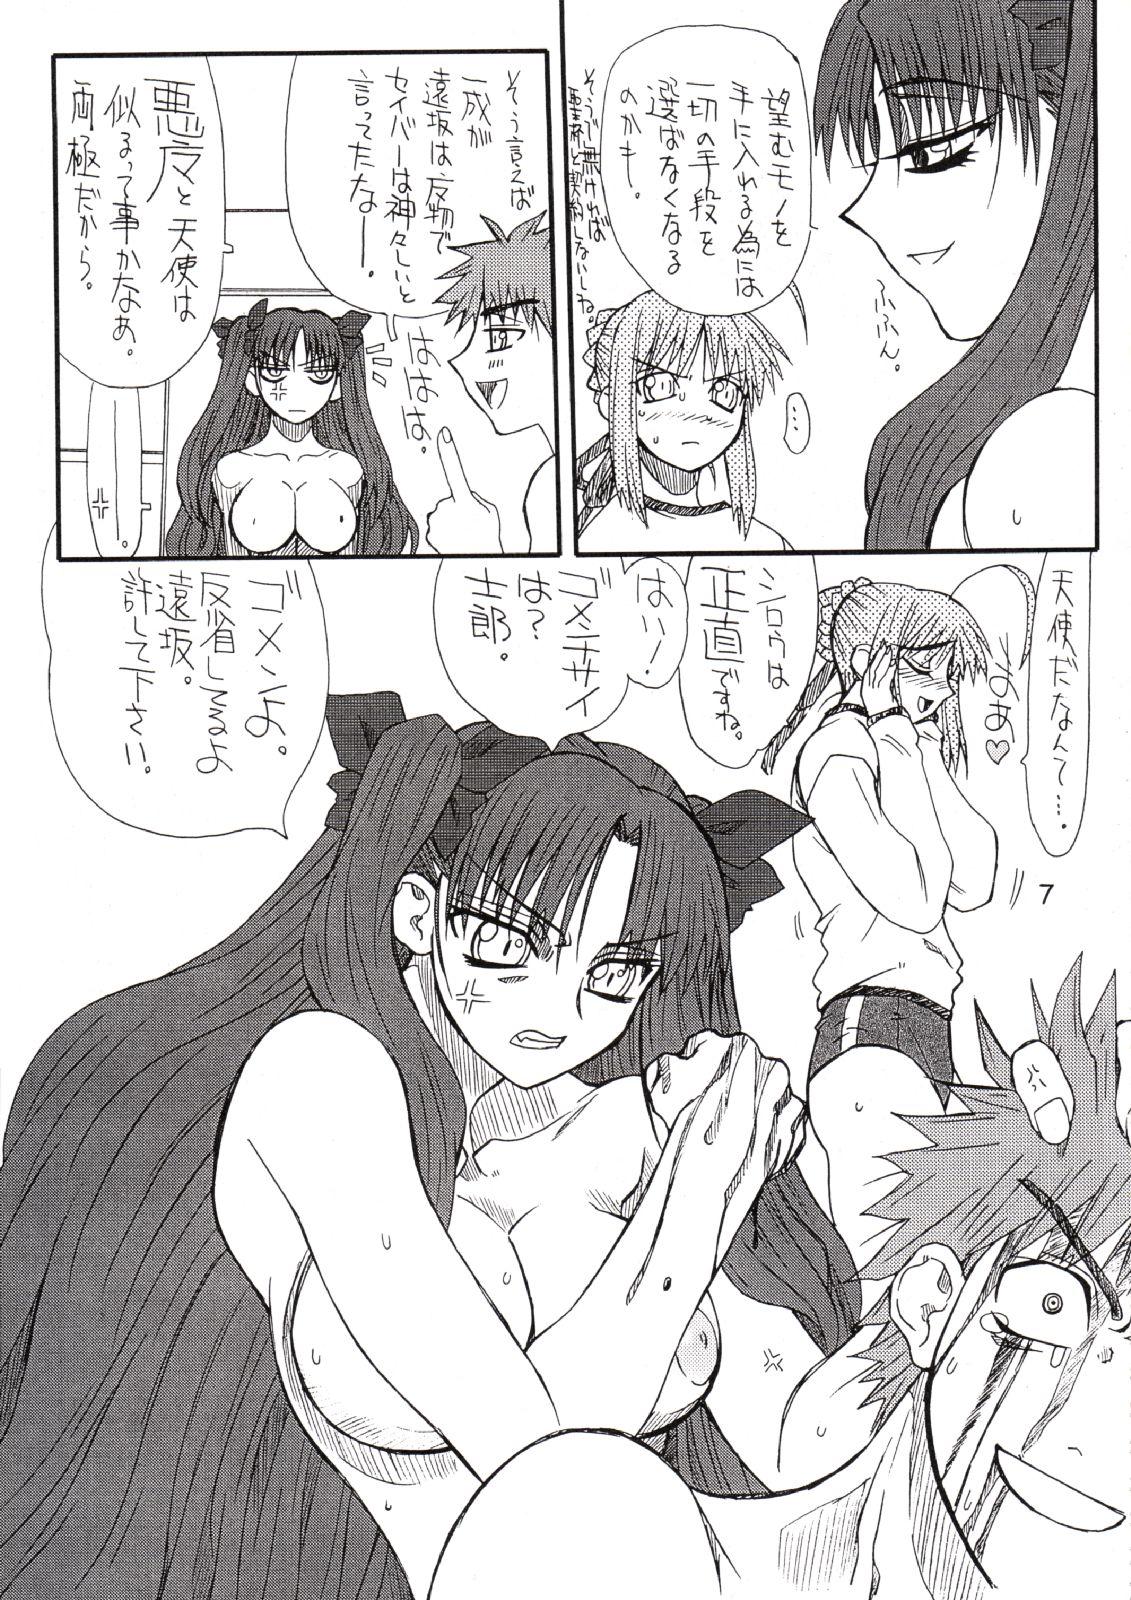 Stepdaughter Corn 2 - Fate stay night Asian Babes - Page 6